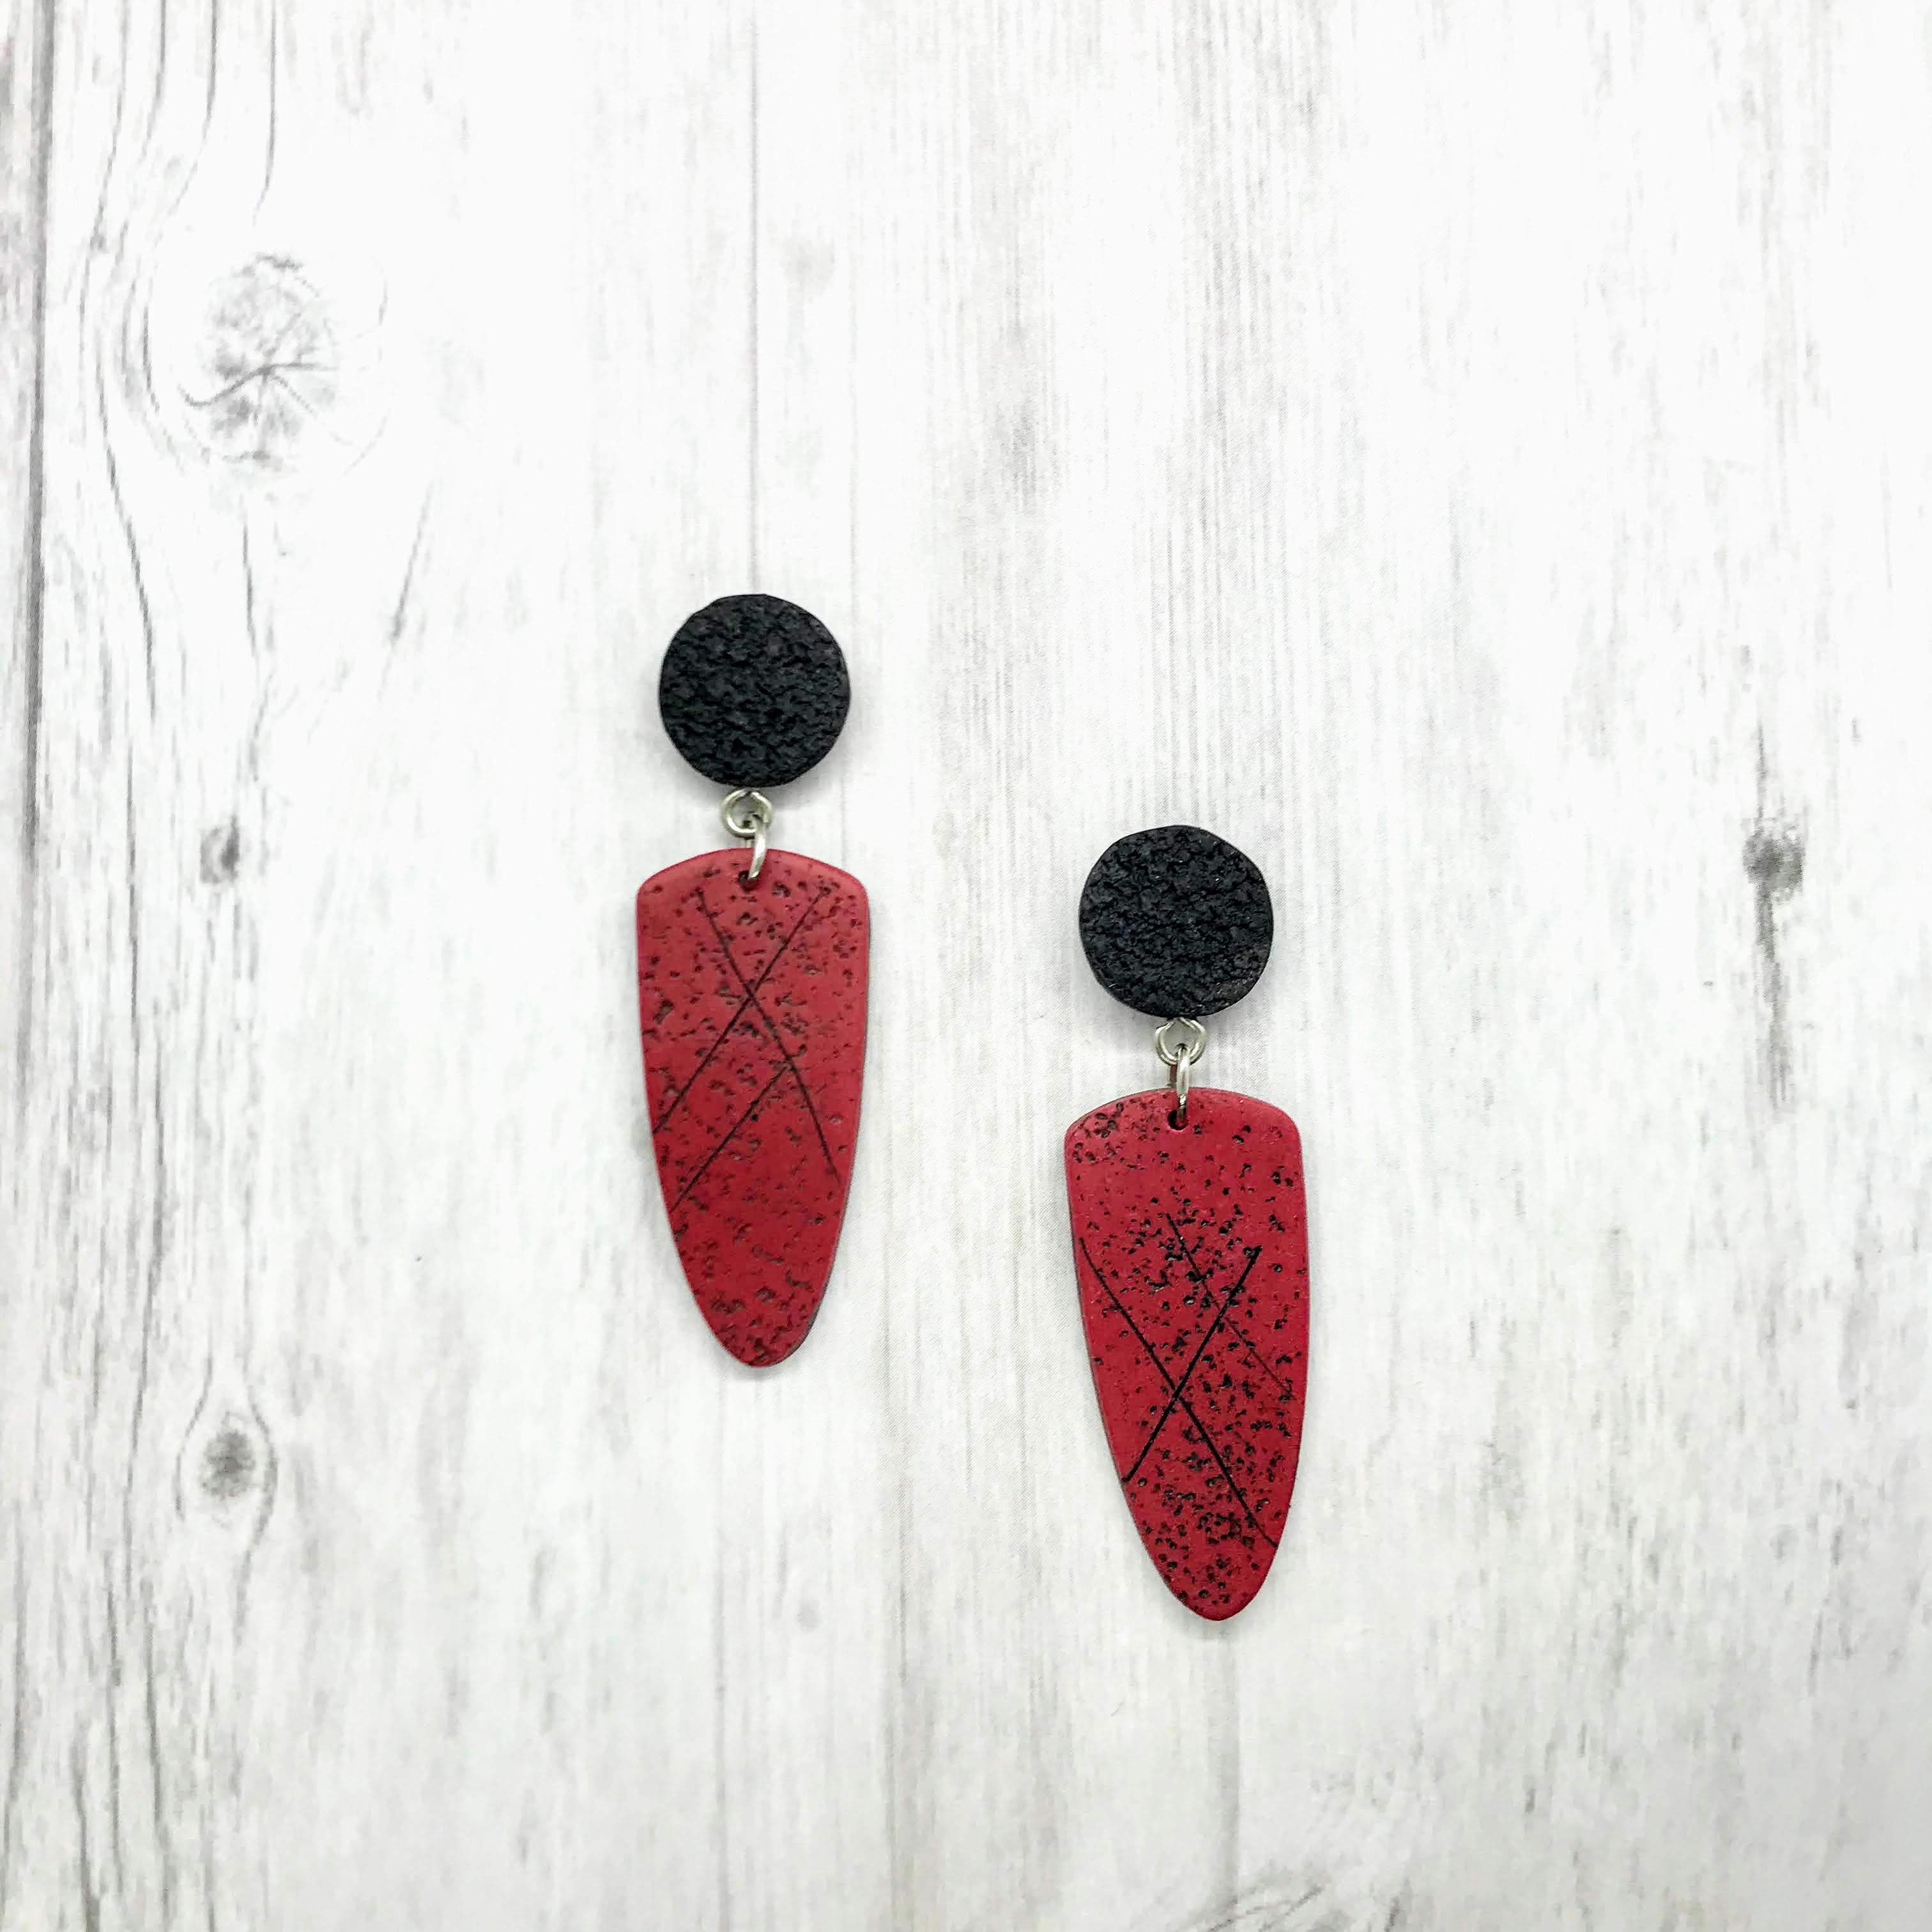 Red Lodge Earrings, Red